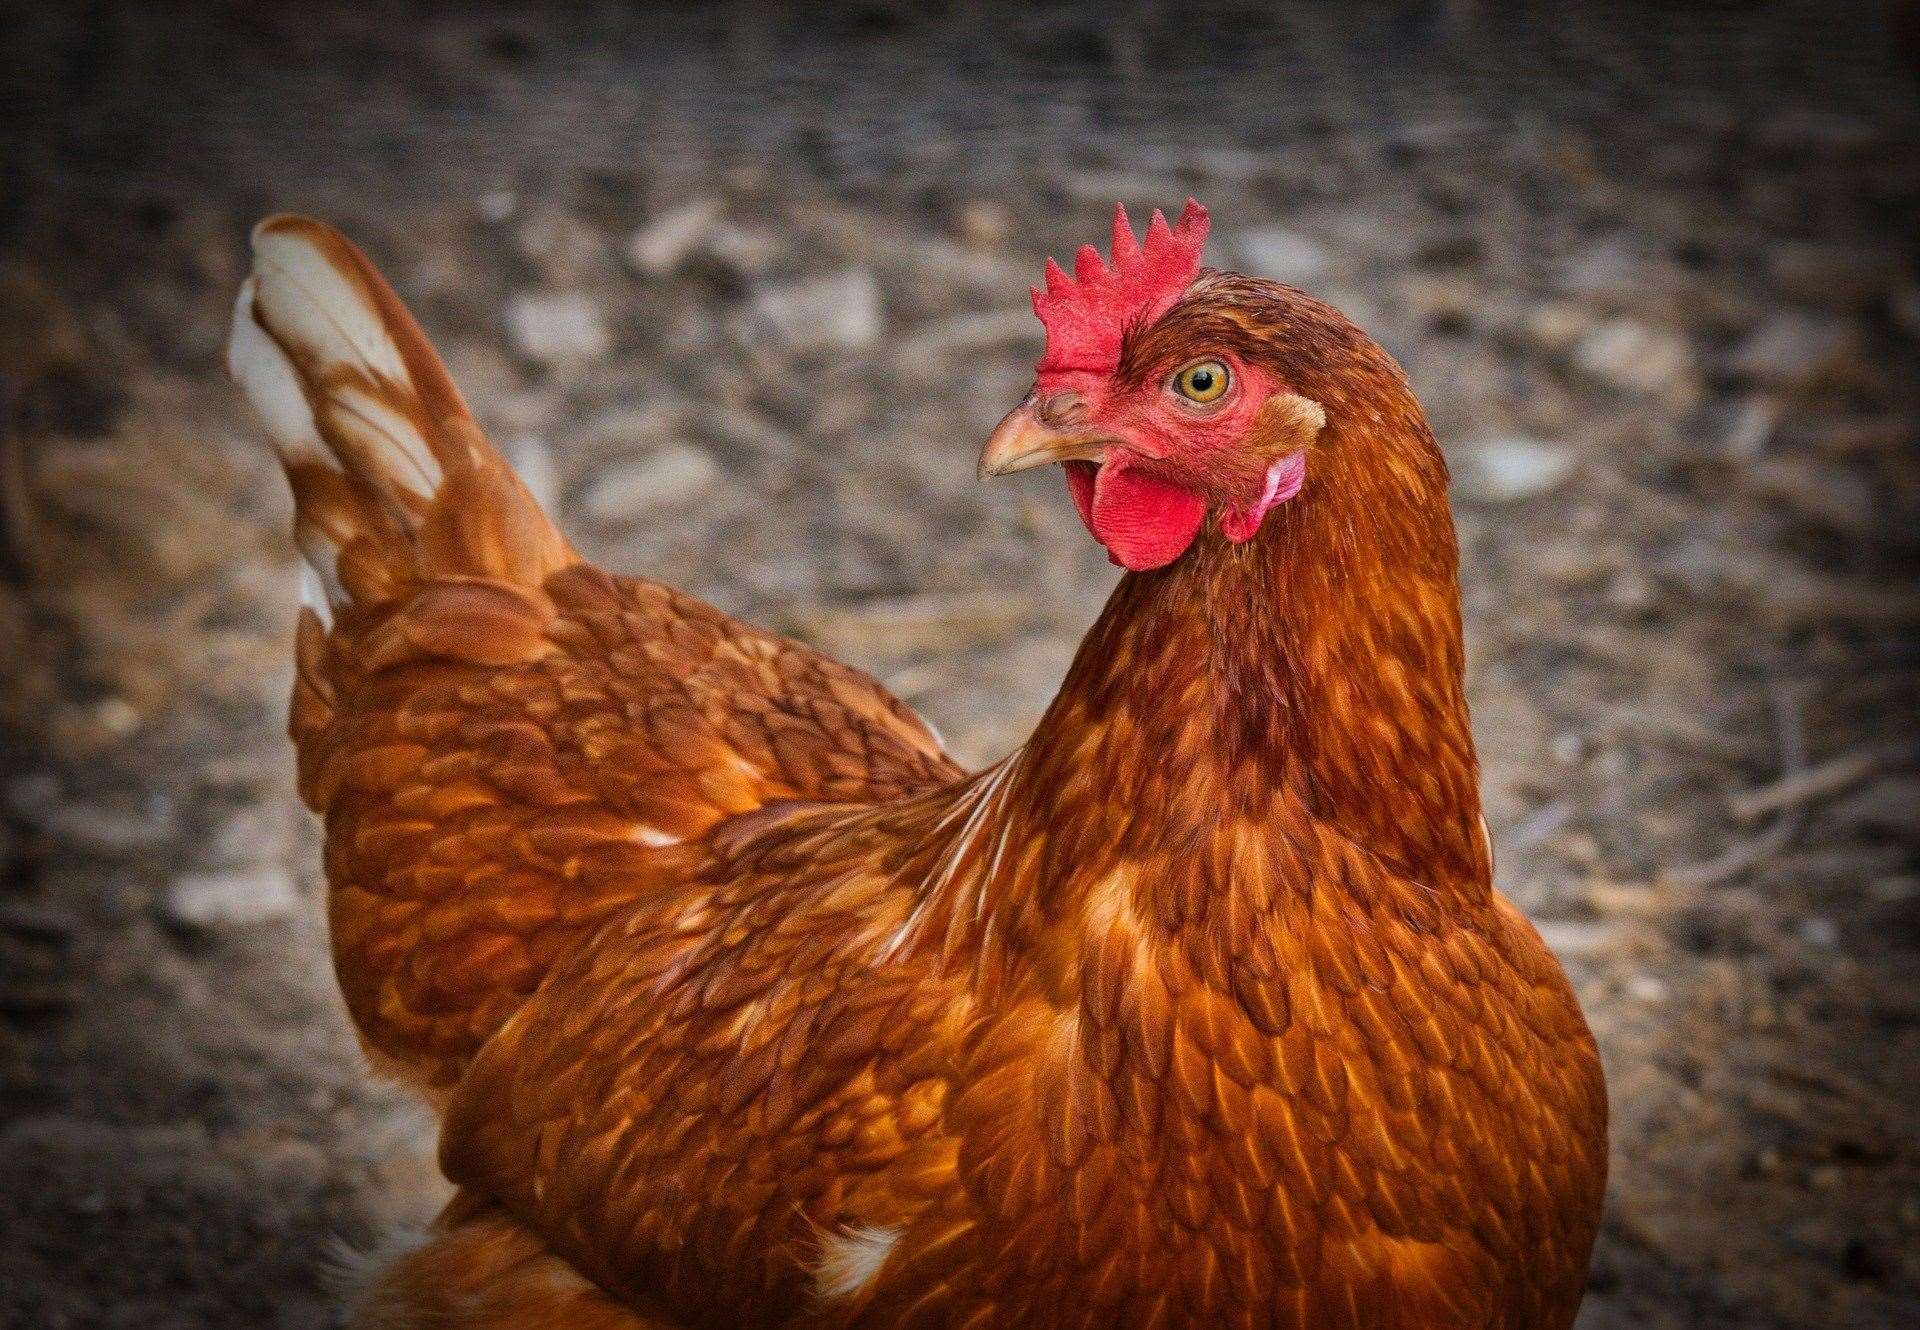 Hens remain undercover as the UK grapples with its biggest ever bird flu outbreak. Image: iStock.